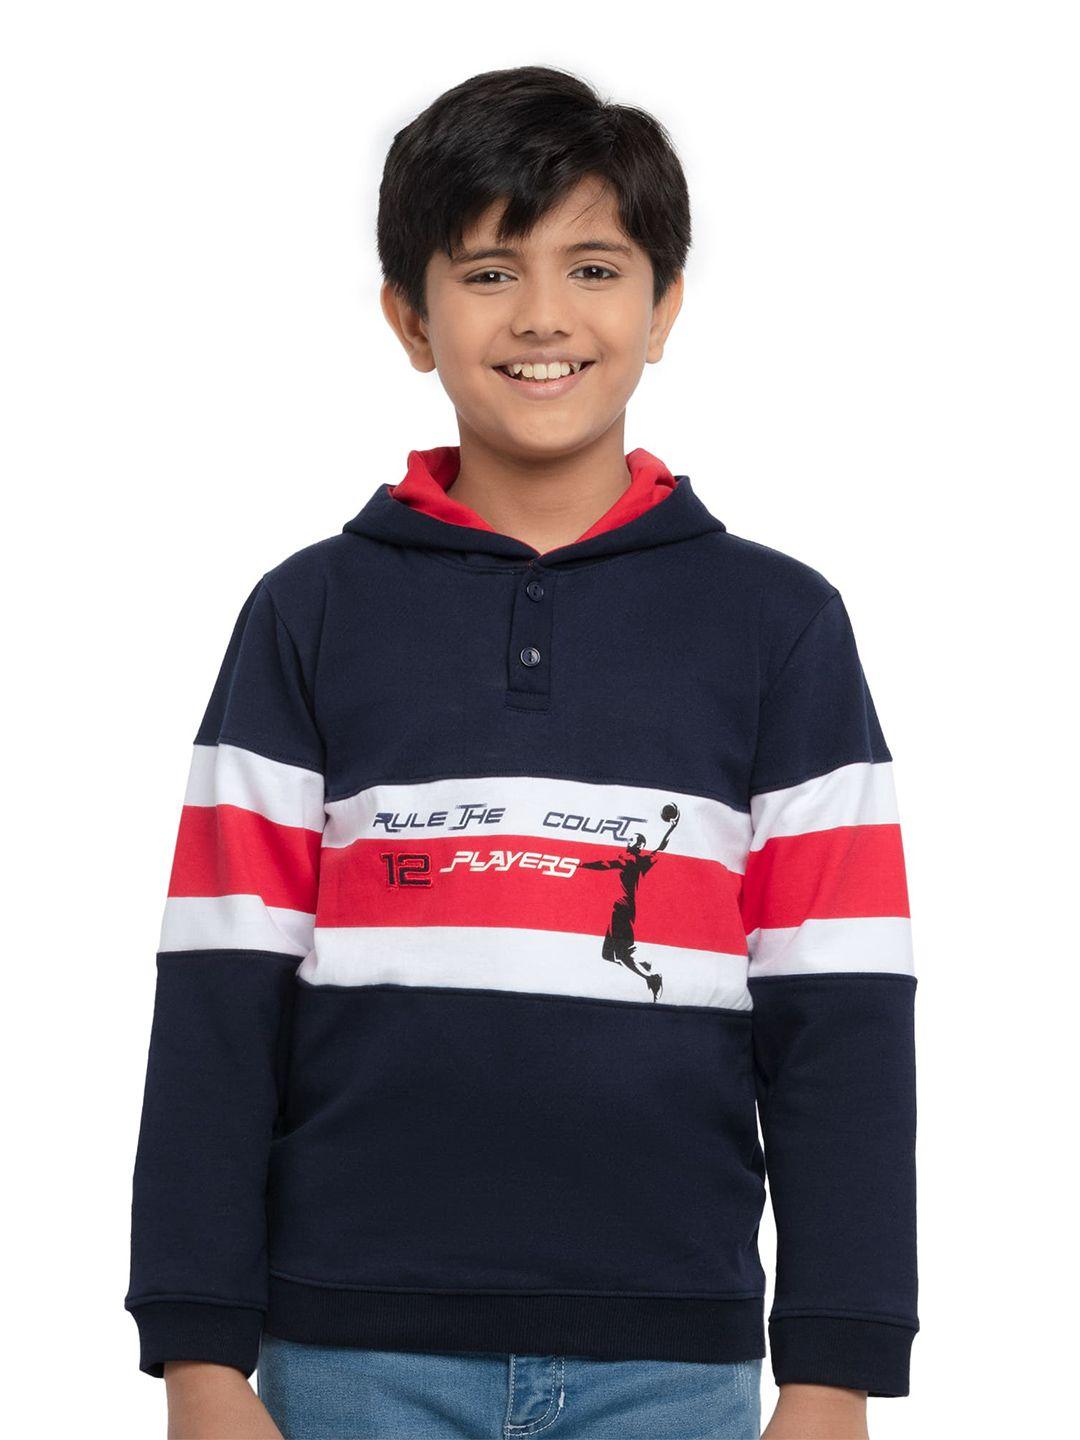 under fourteen only boys navy blue & white typography printed hooded cotton sweatshirt